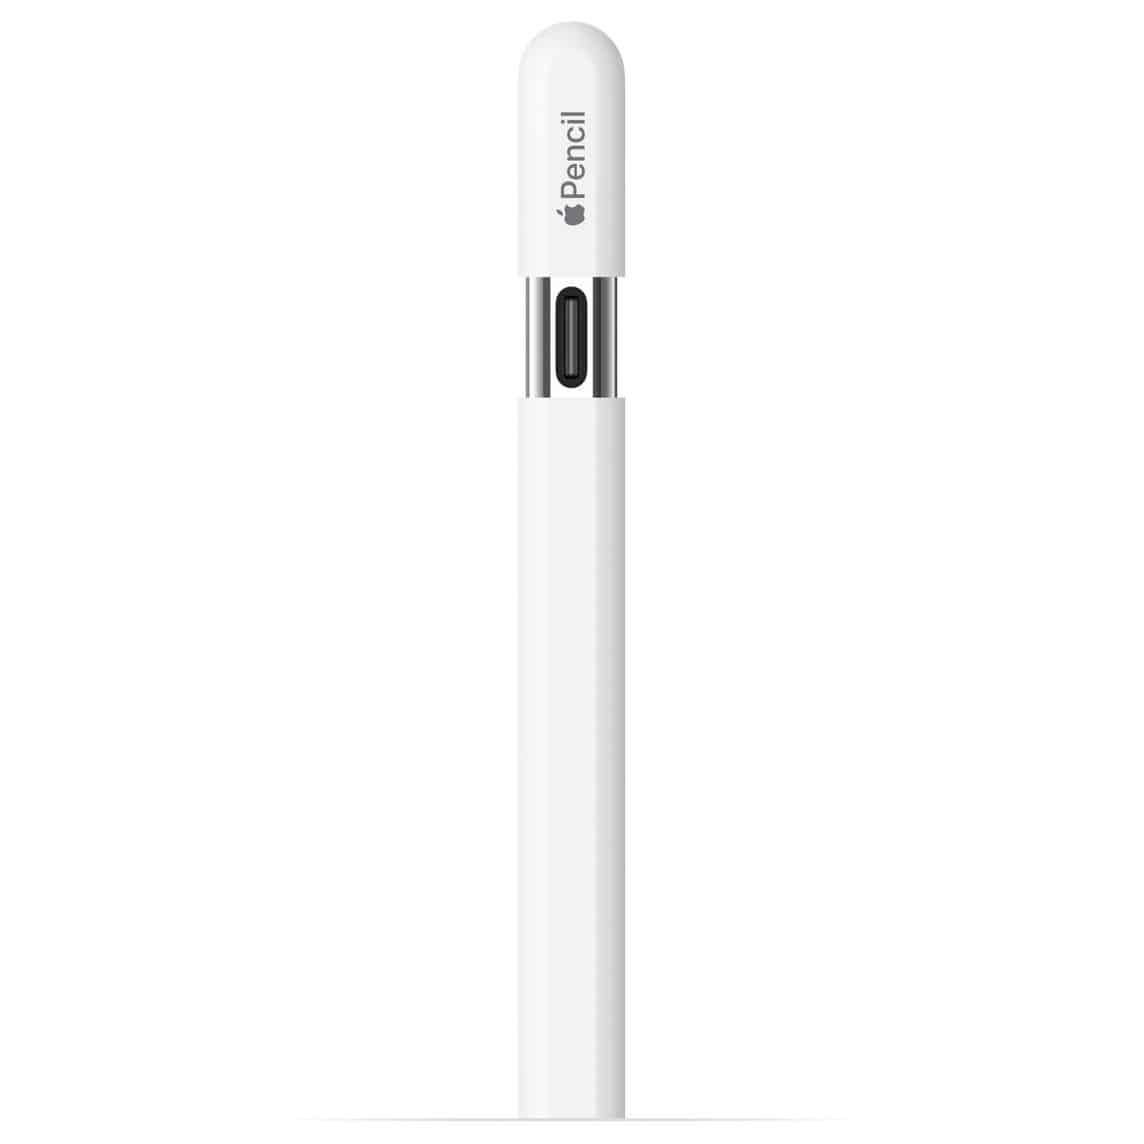 Apple Pencil C Type supported